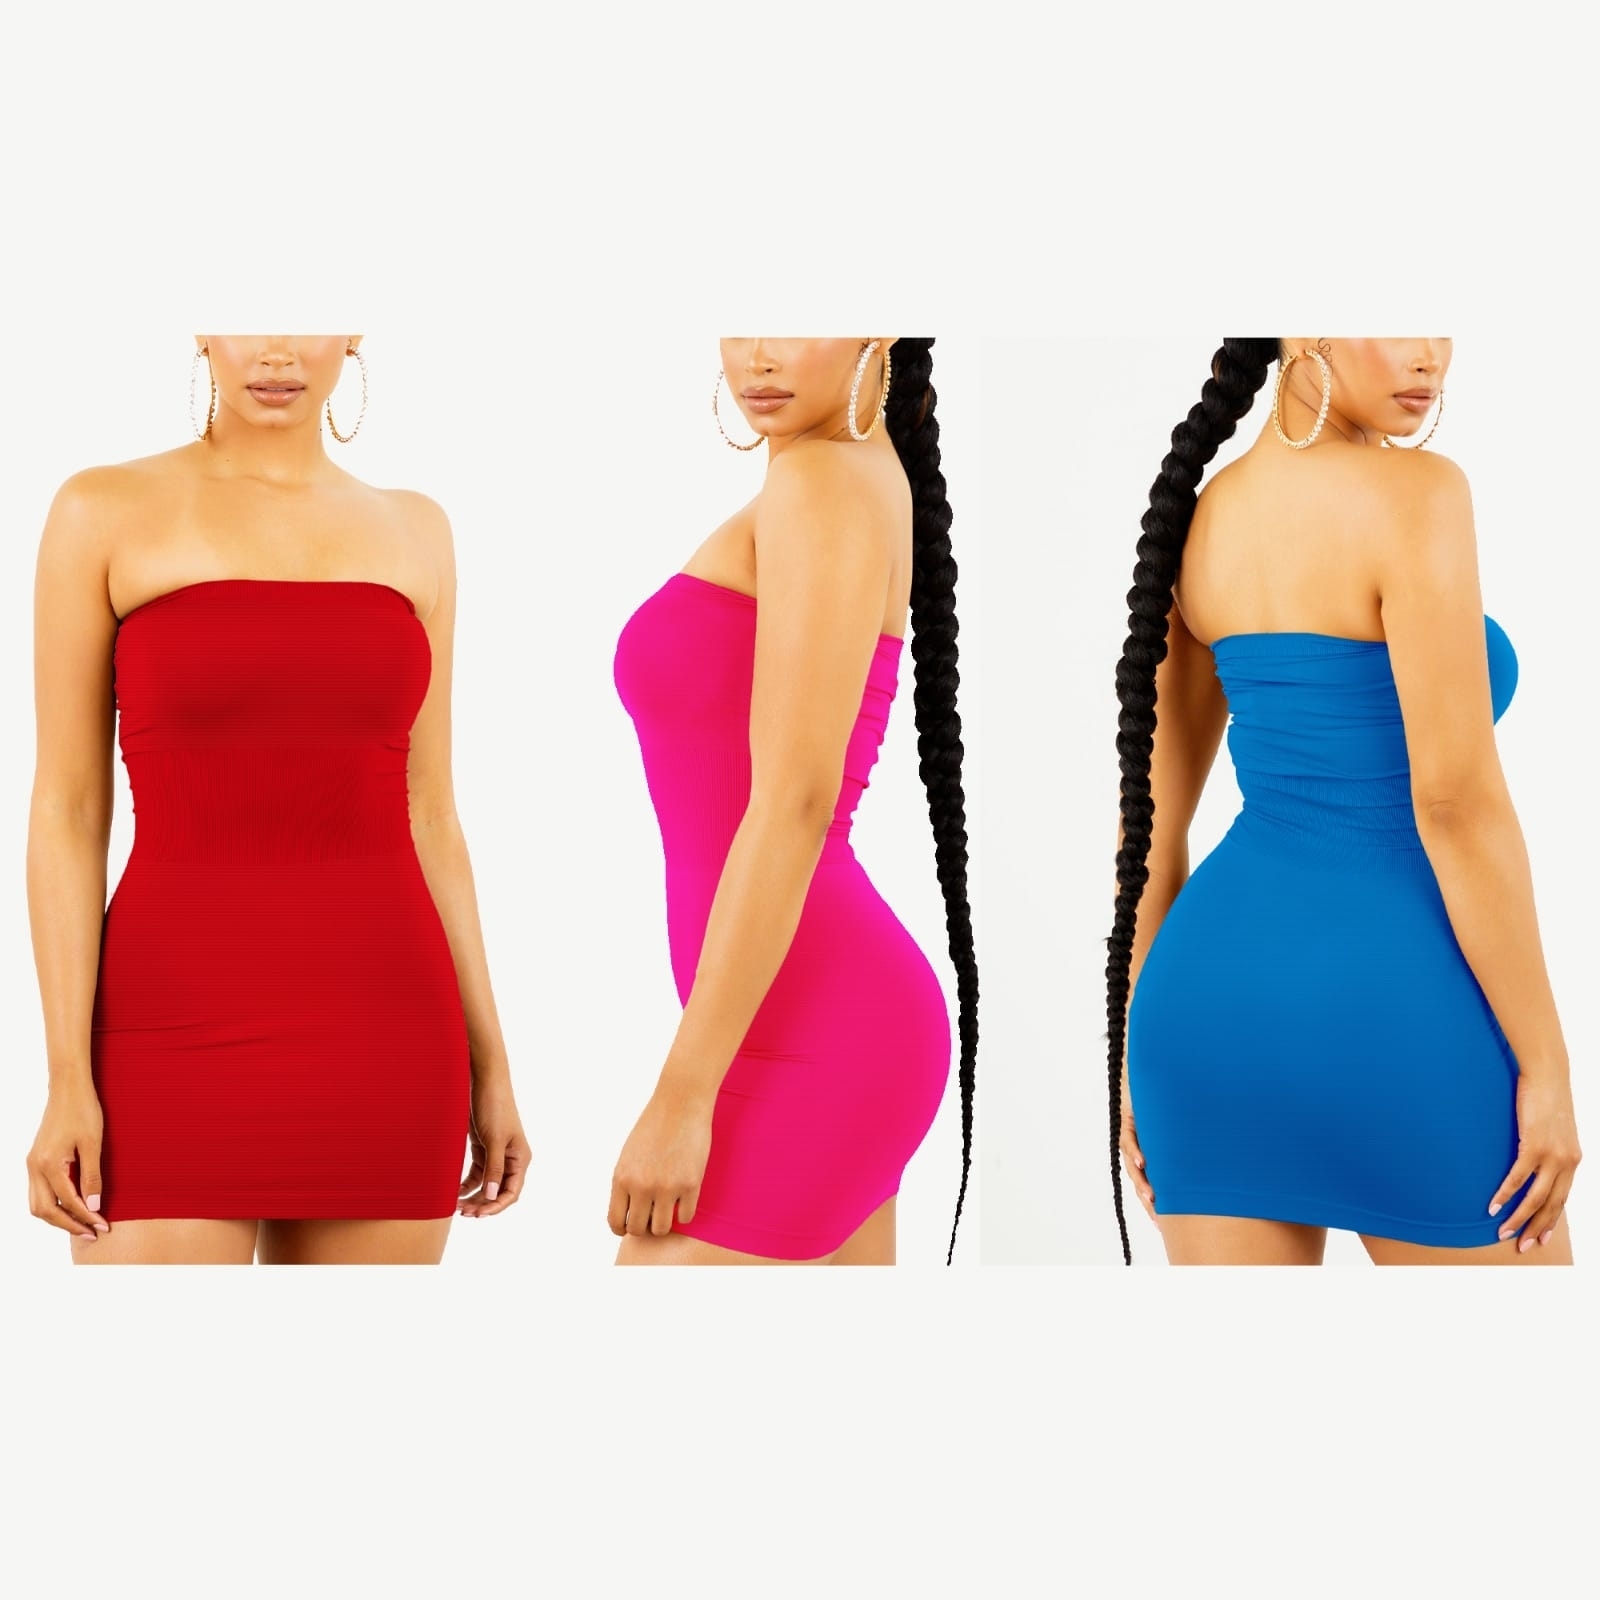 2-Pack Women's Strapless Stretchy Tight Fit Seamless Body Con Mini Tube Top Dress - PINK, 1XL